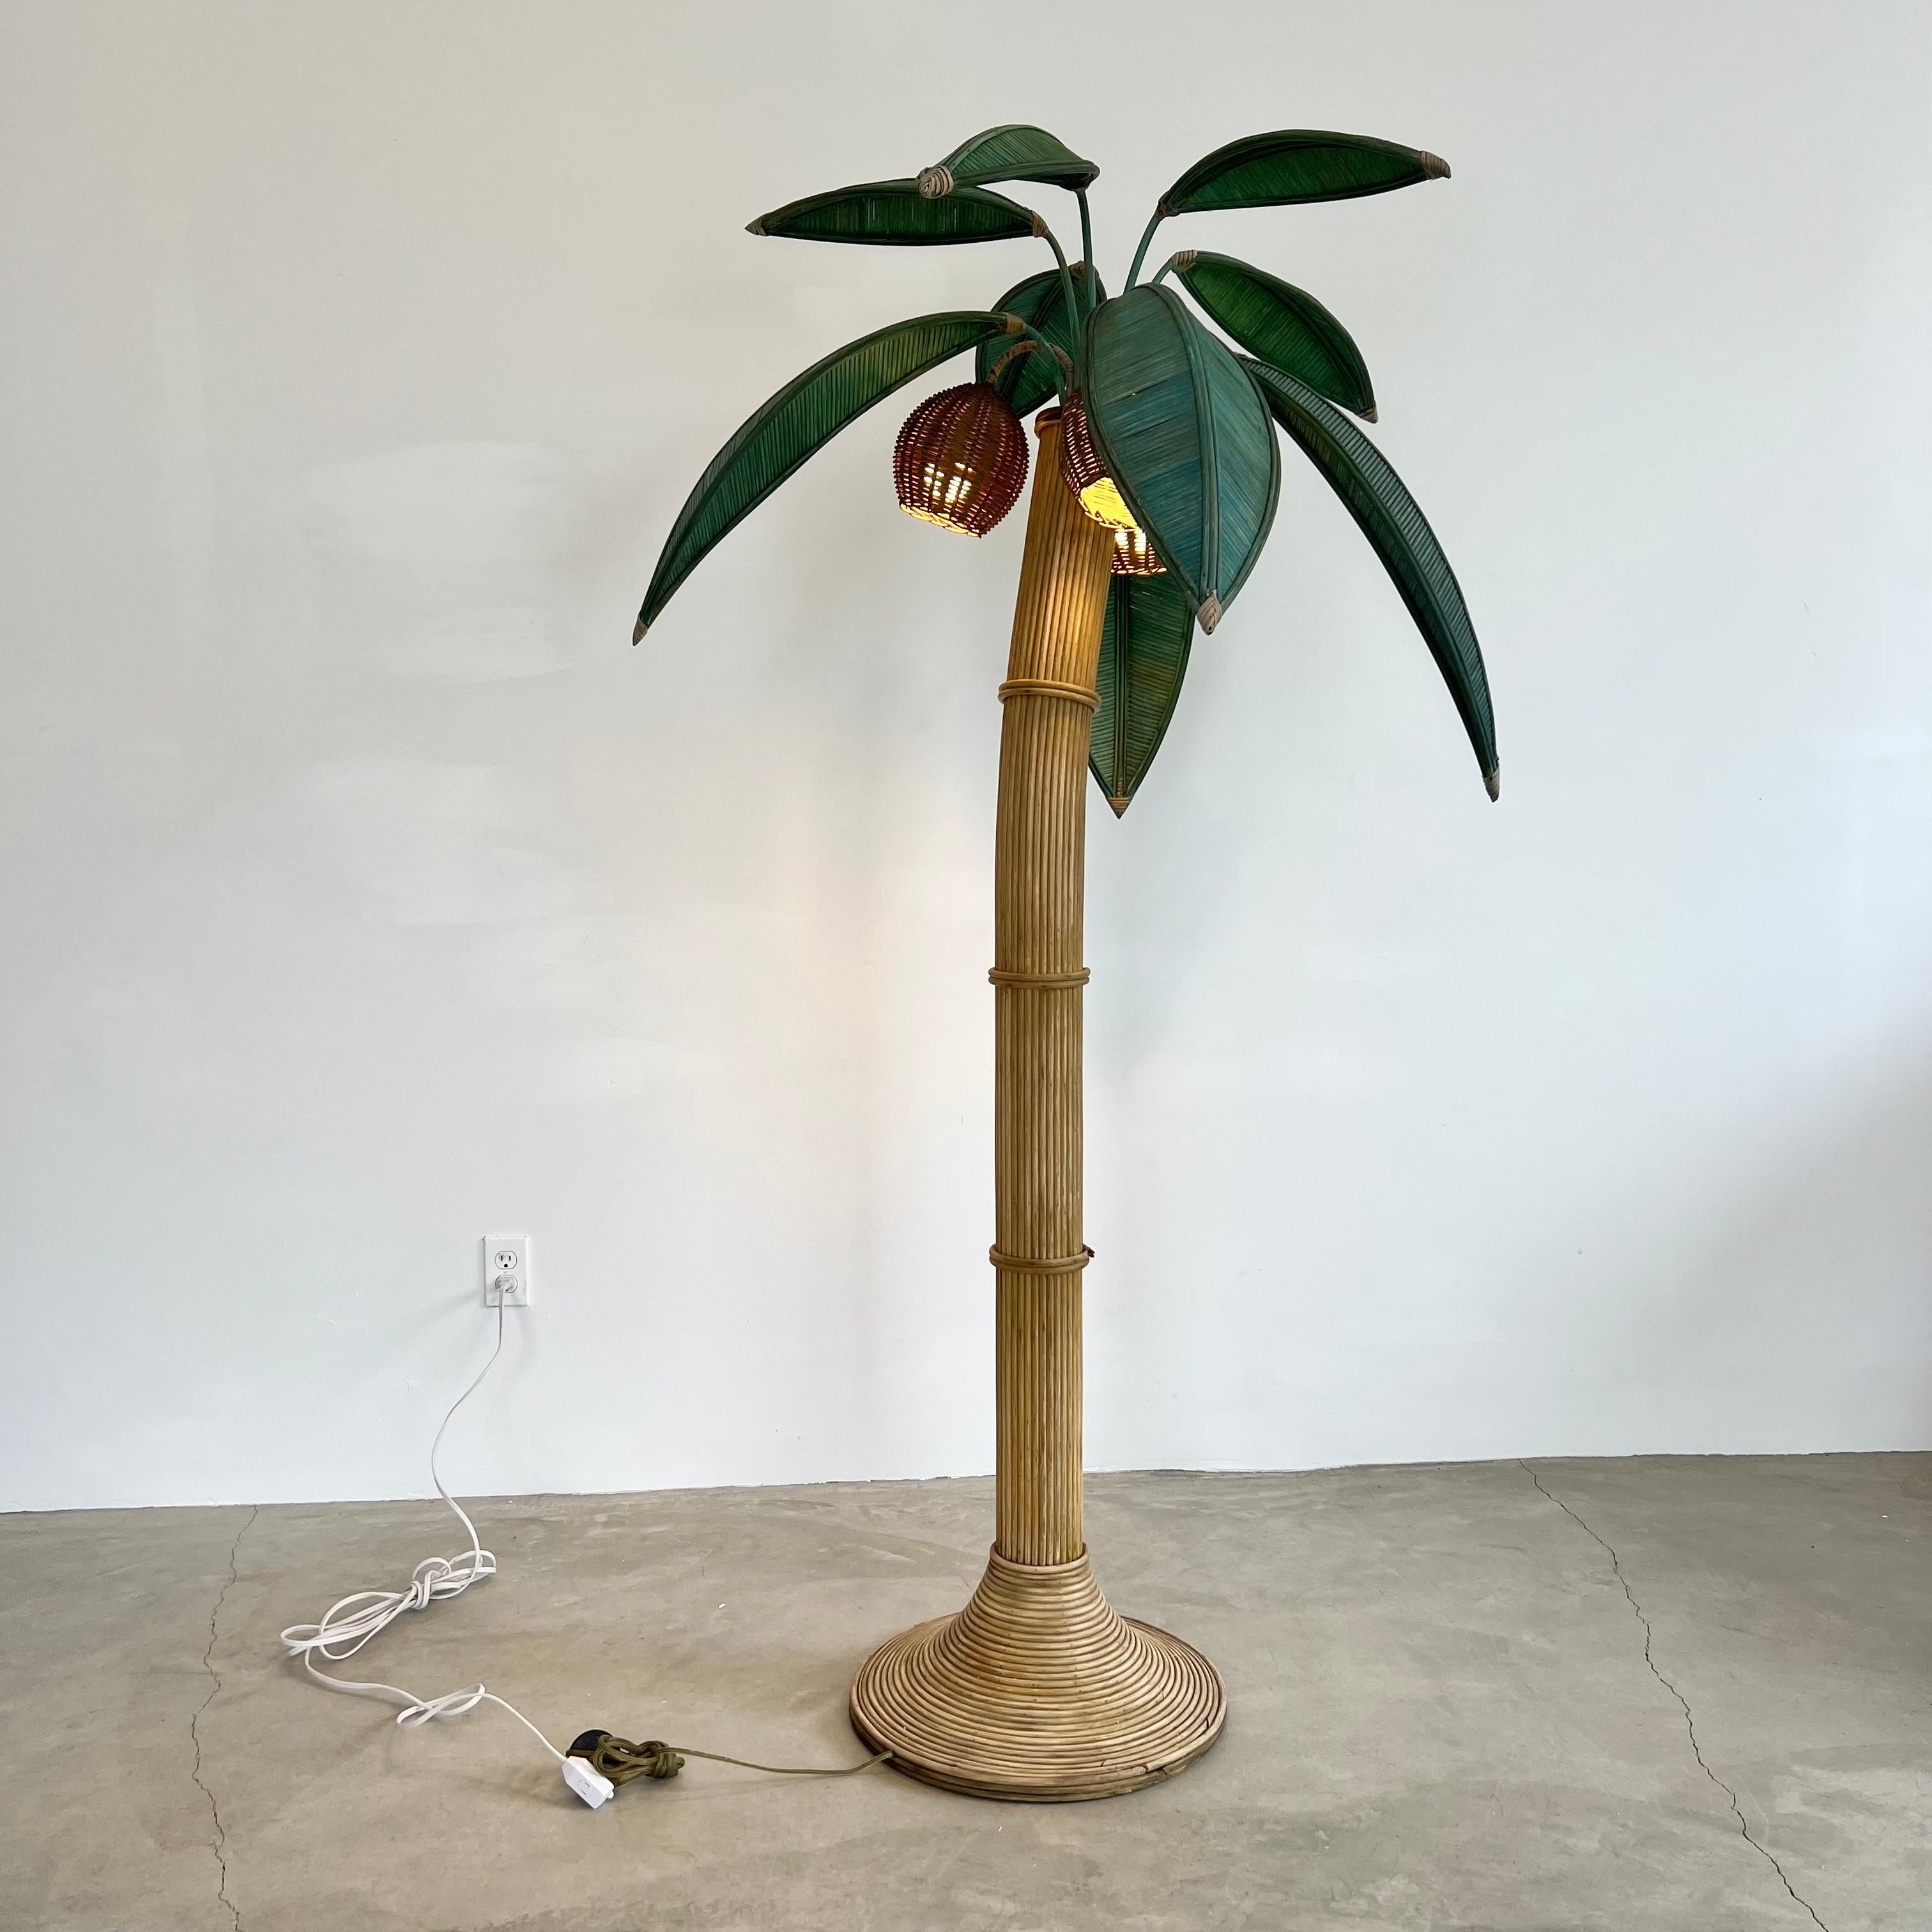 Beachy floor lamp of a palm tree. Original lamp made in the 1970s. Just under 7 feet tall. Made of rattan and wicker and bamboo. Curved trunk resembles a leaning palm tree. Three wicker coconuts each contain a socket/light inside. Coconuts swivel.